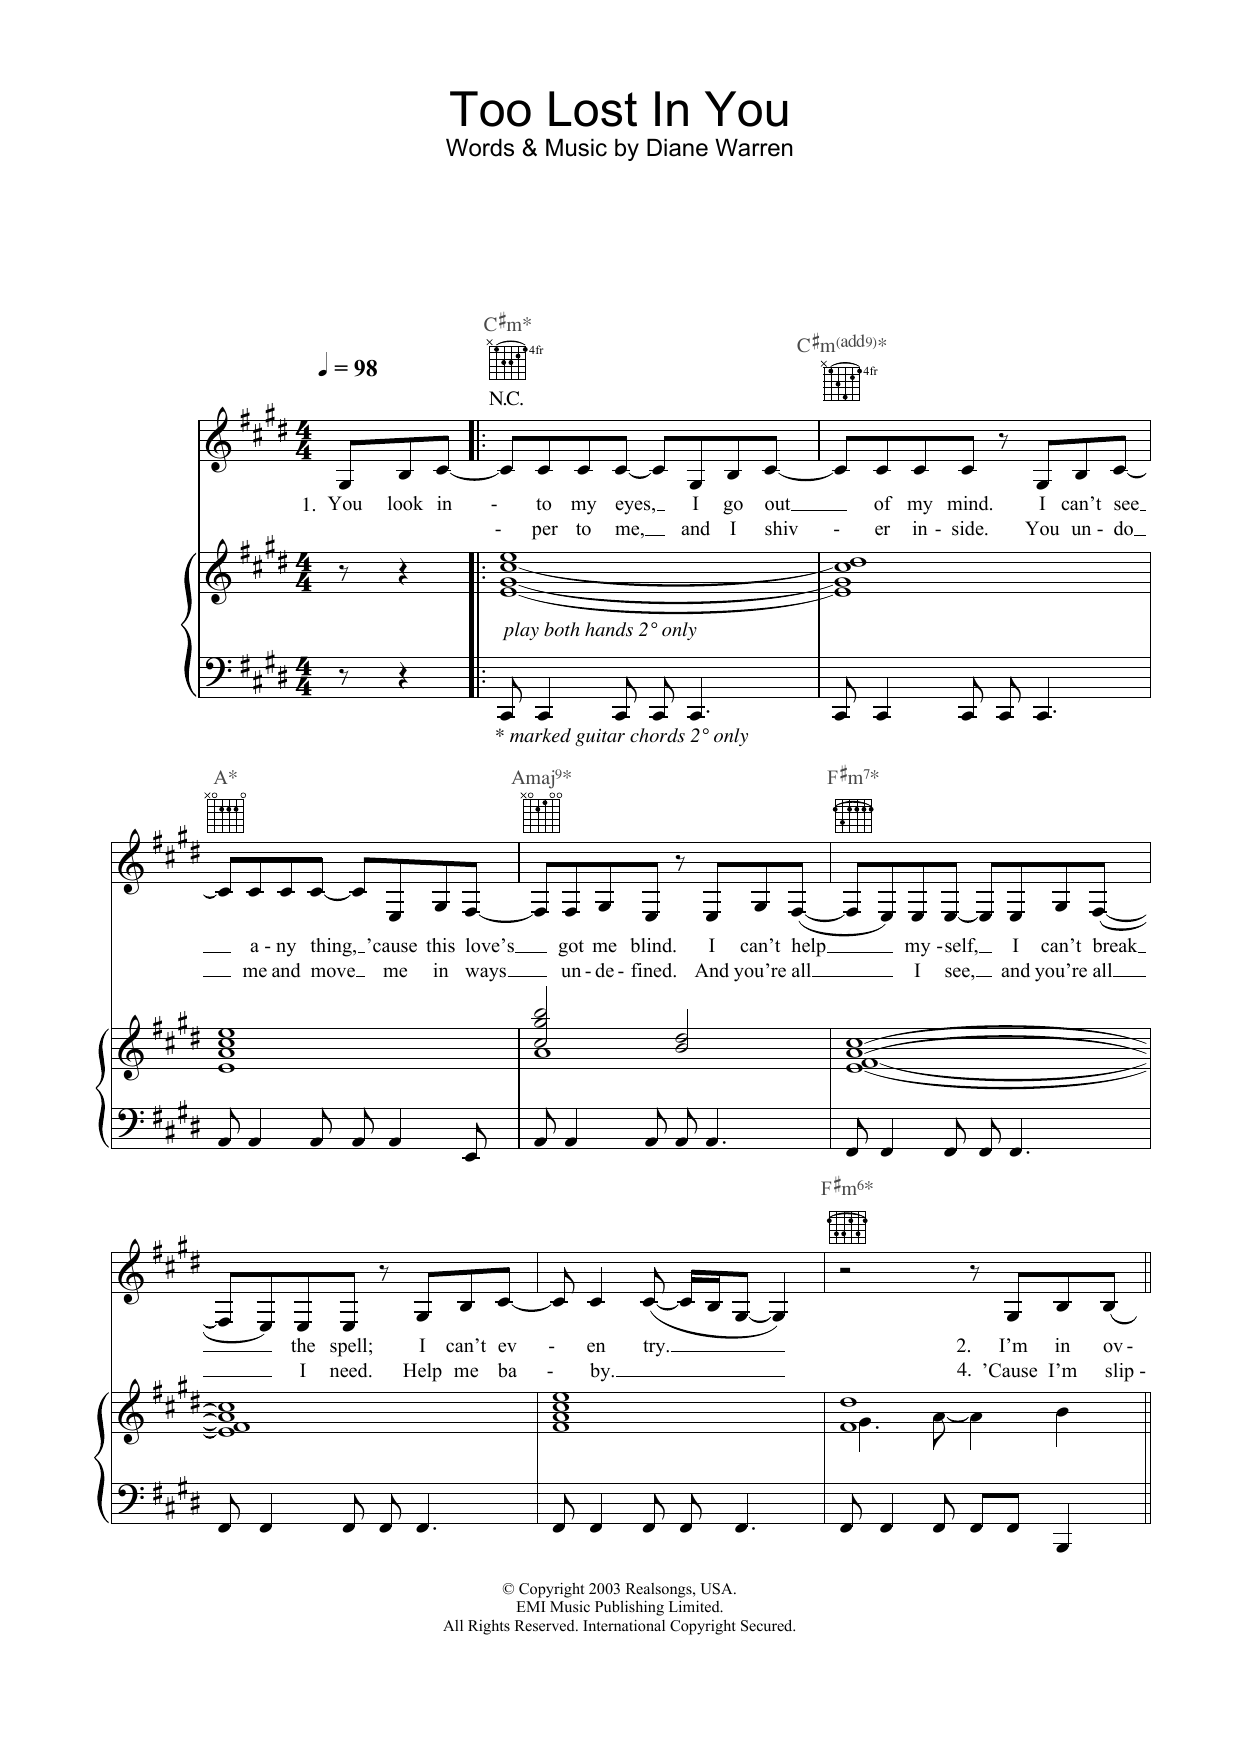 Download Sugababes Too Lost In You Sheet Music